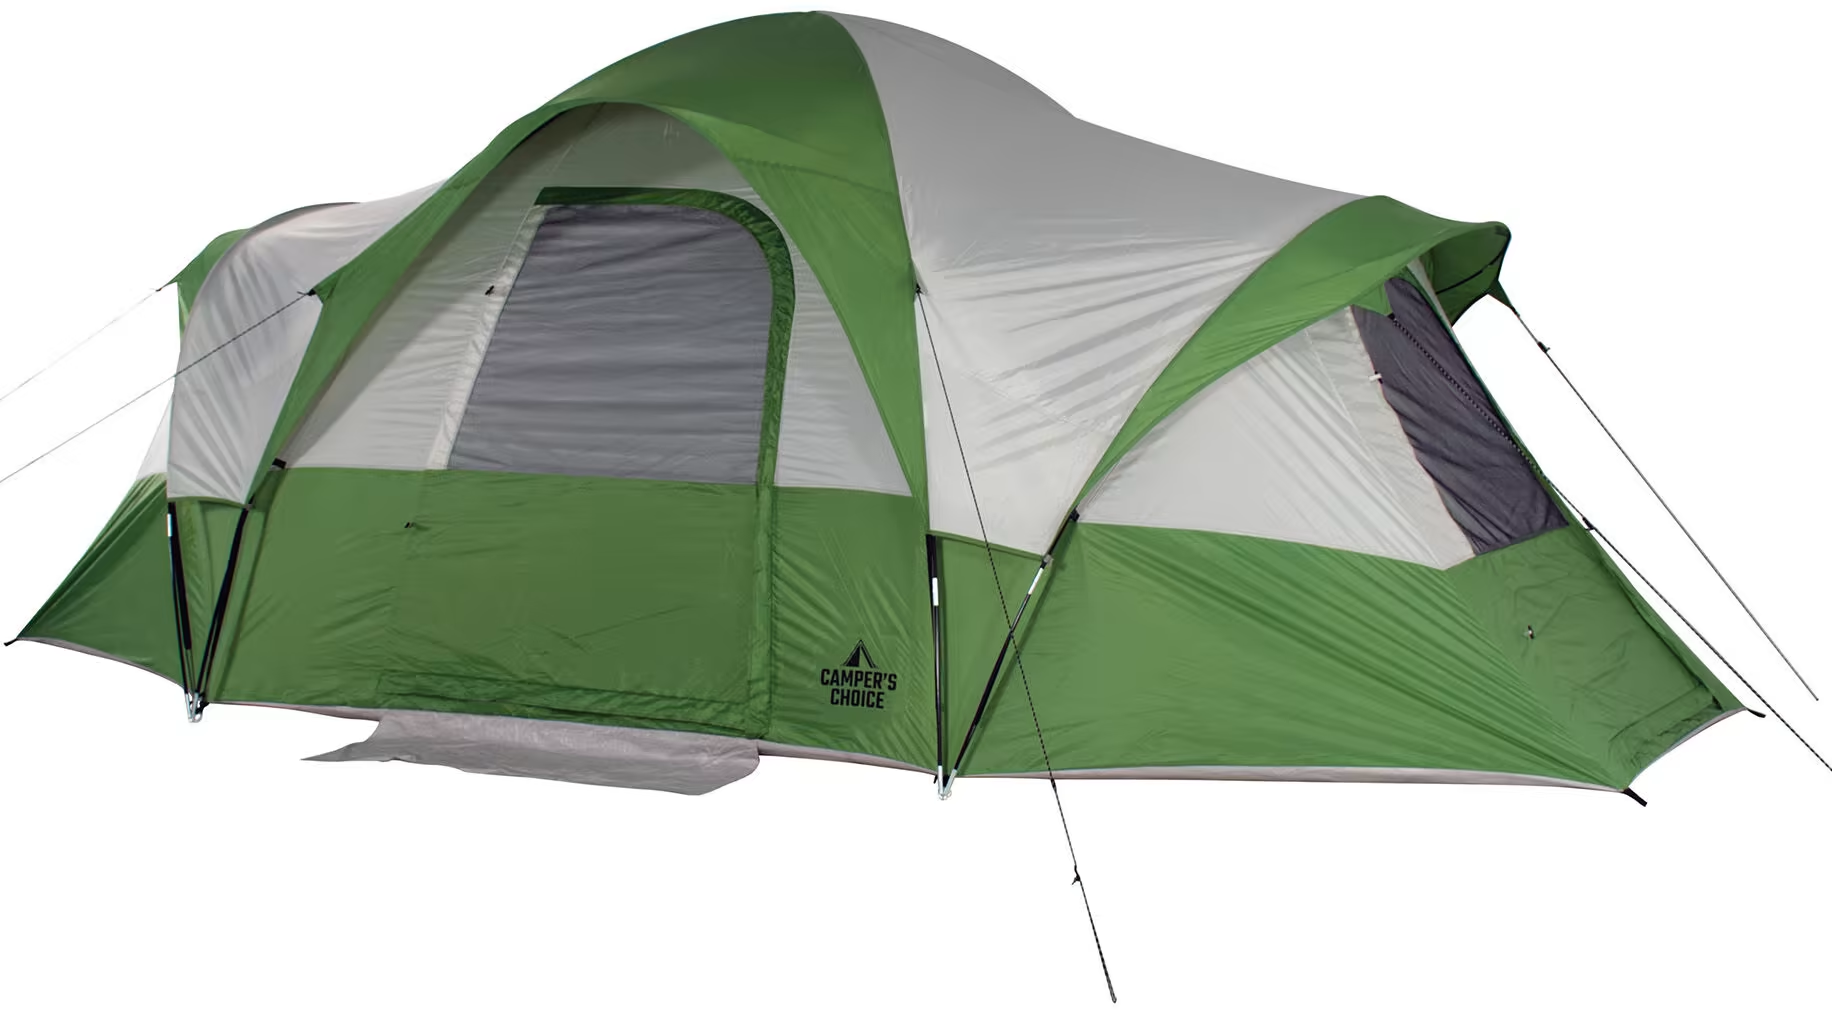 Camper's Choice 8P Tent  $21 was $160 The House $21.25